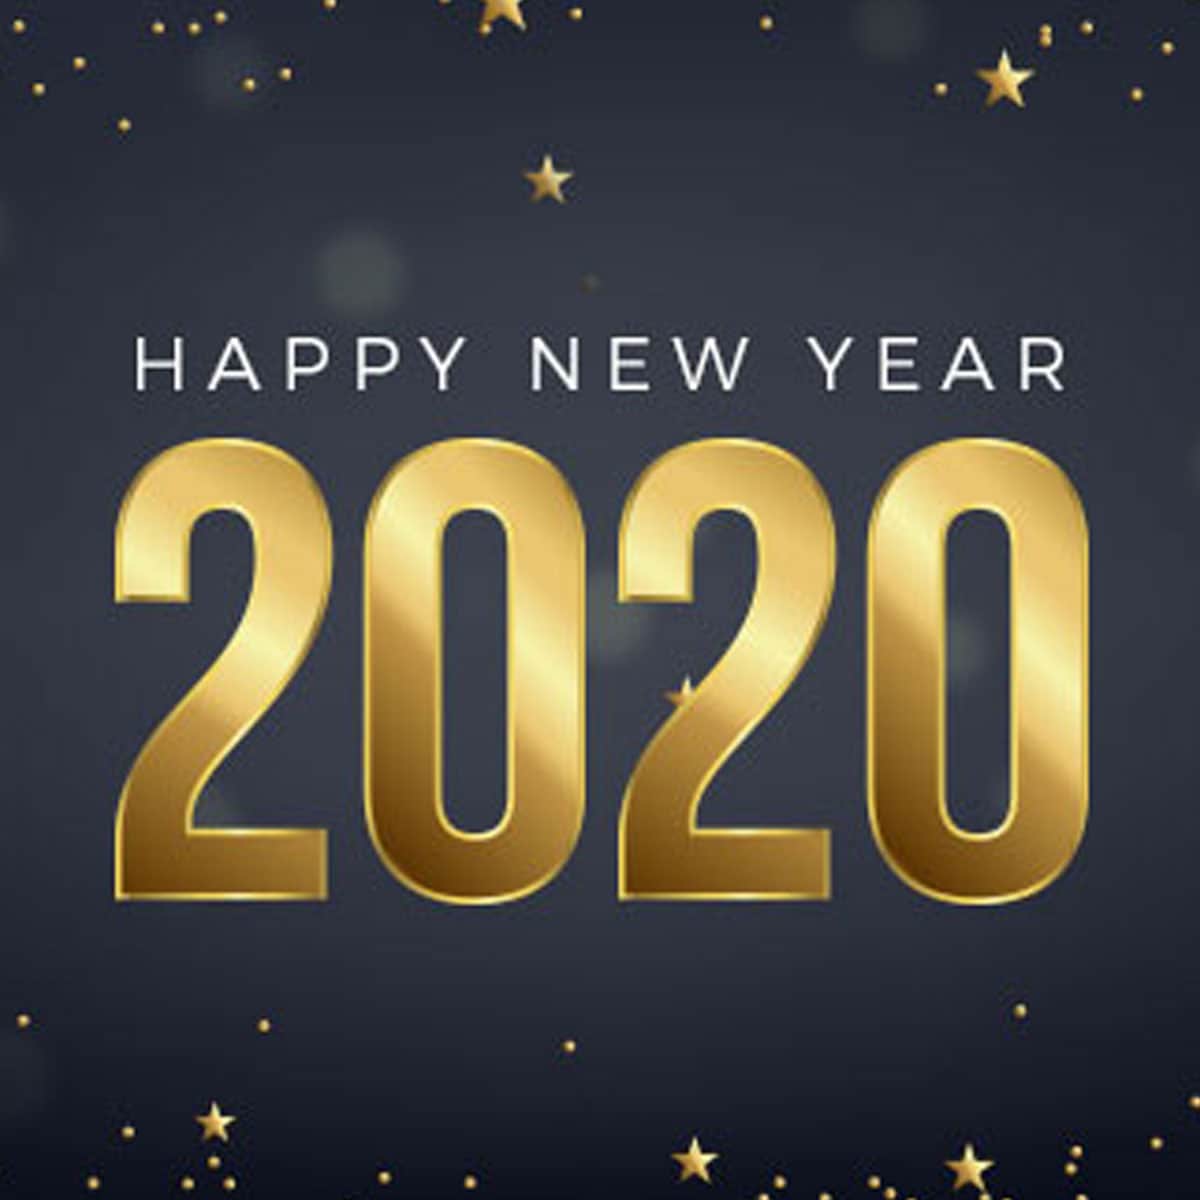 New Year 2020: New Year Greetings, Happy New Year Wishes